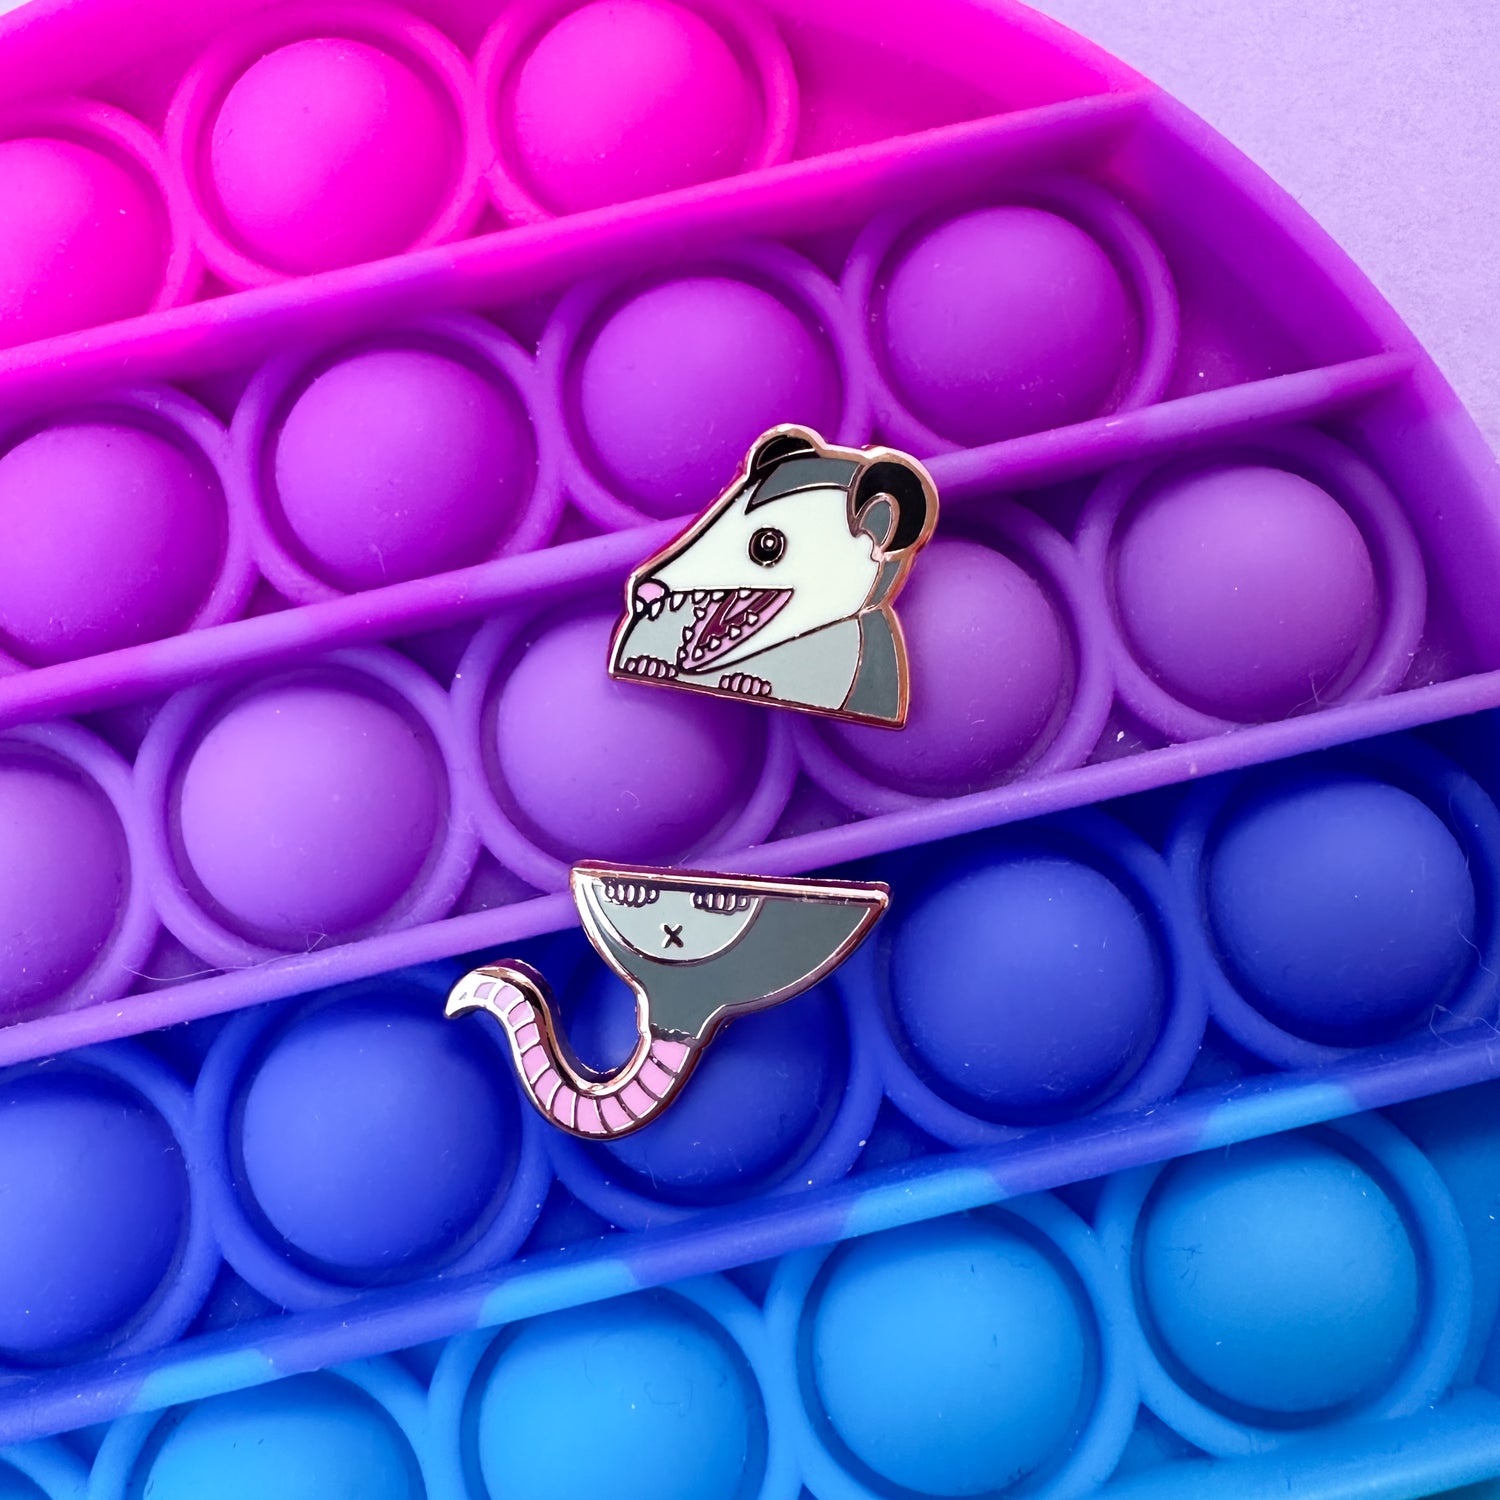 Two enamel pins that come together in the middle to form an opossum. The pins are resting on top of a fidget pop toy. 